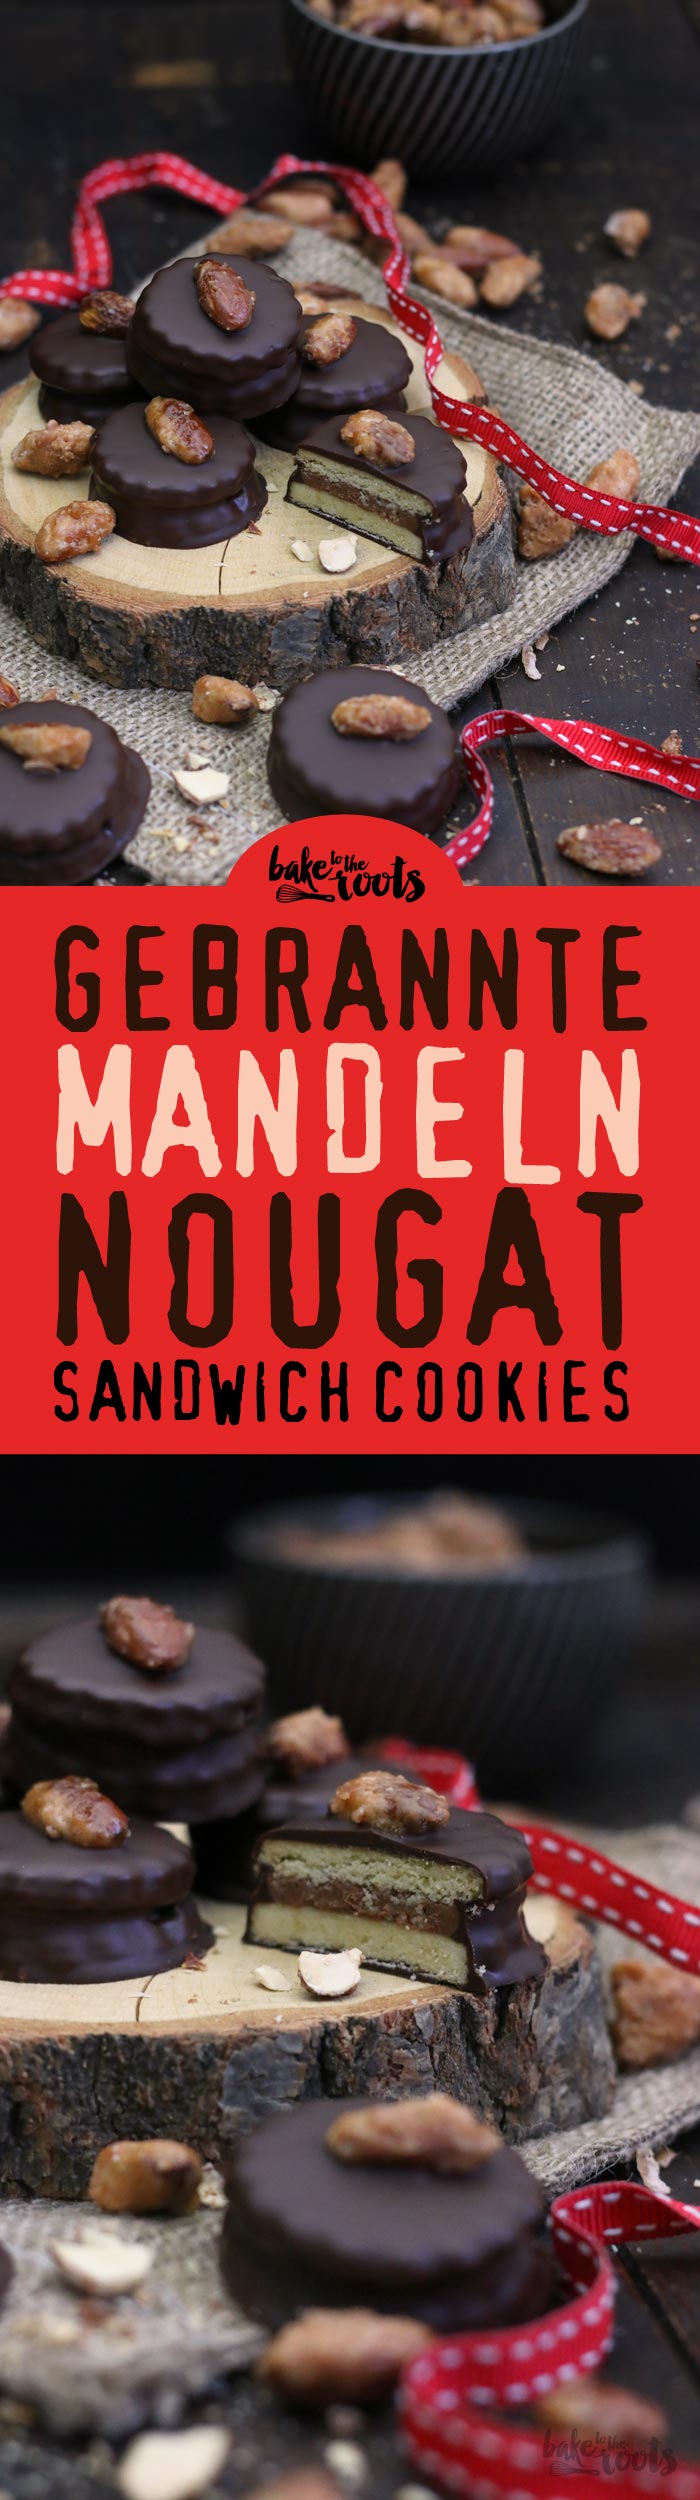 Delicious sandwich cookies with a filling of nut nougat and caramelized almonds | Bake to the roots